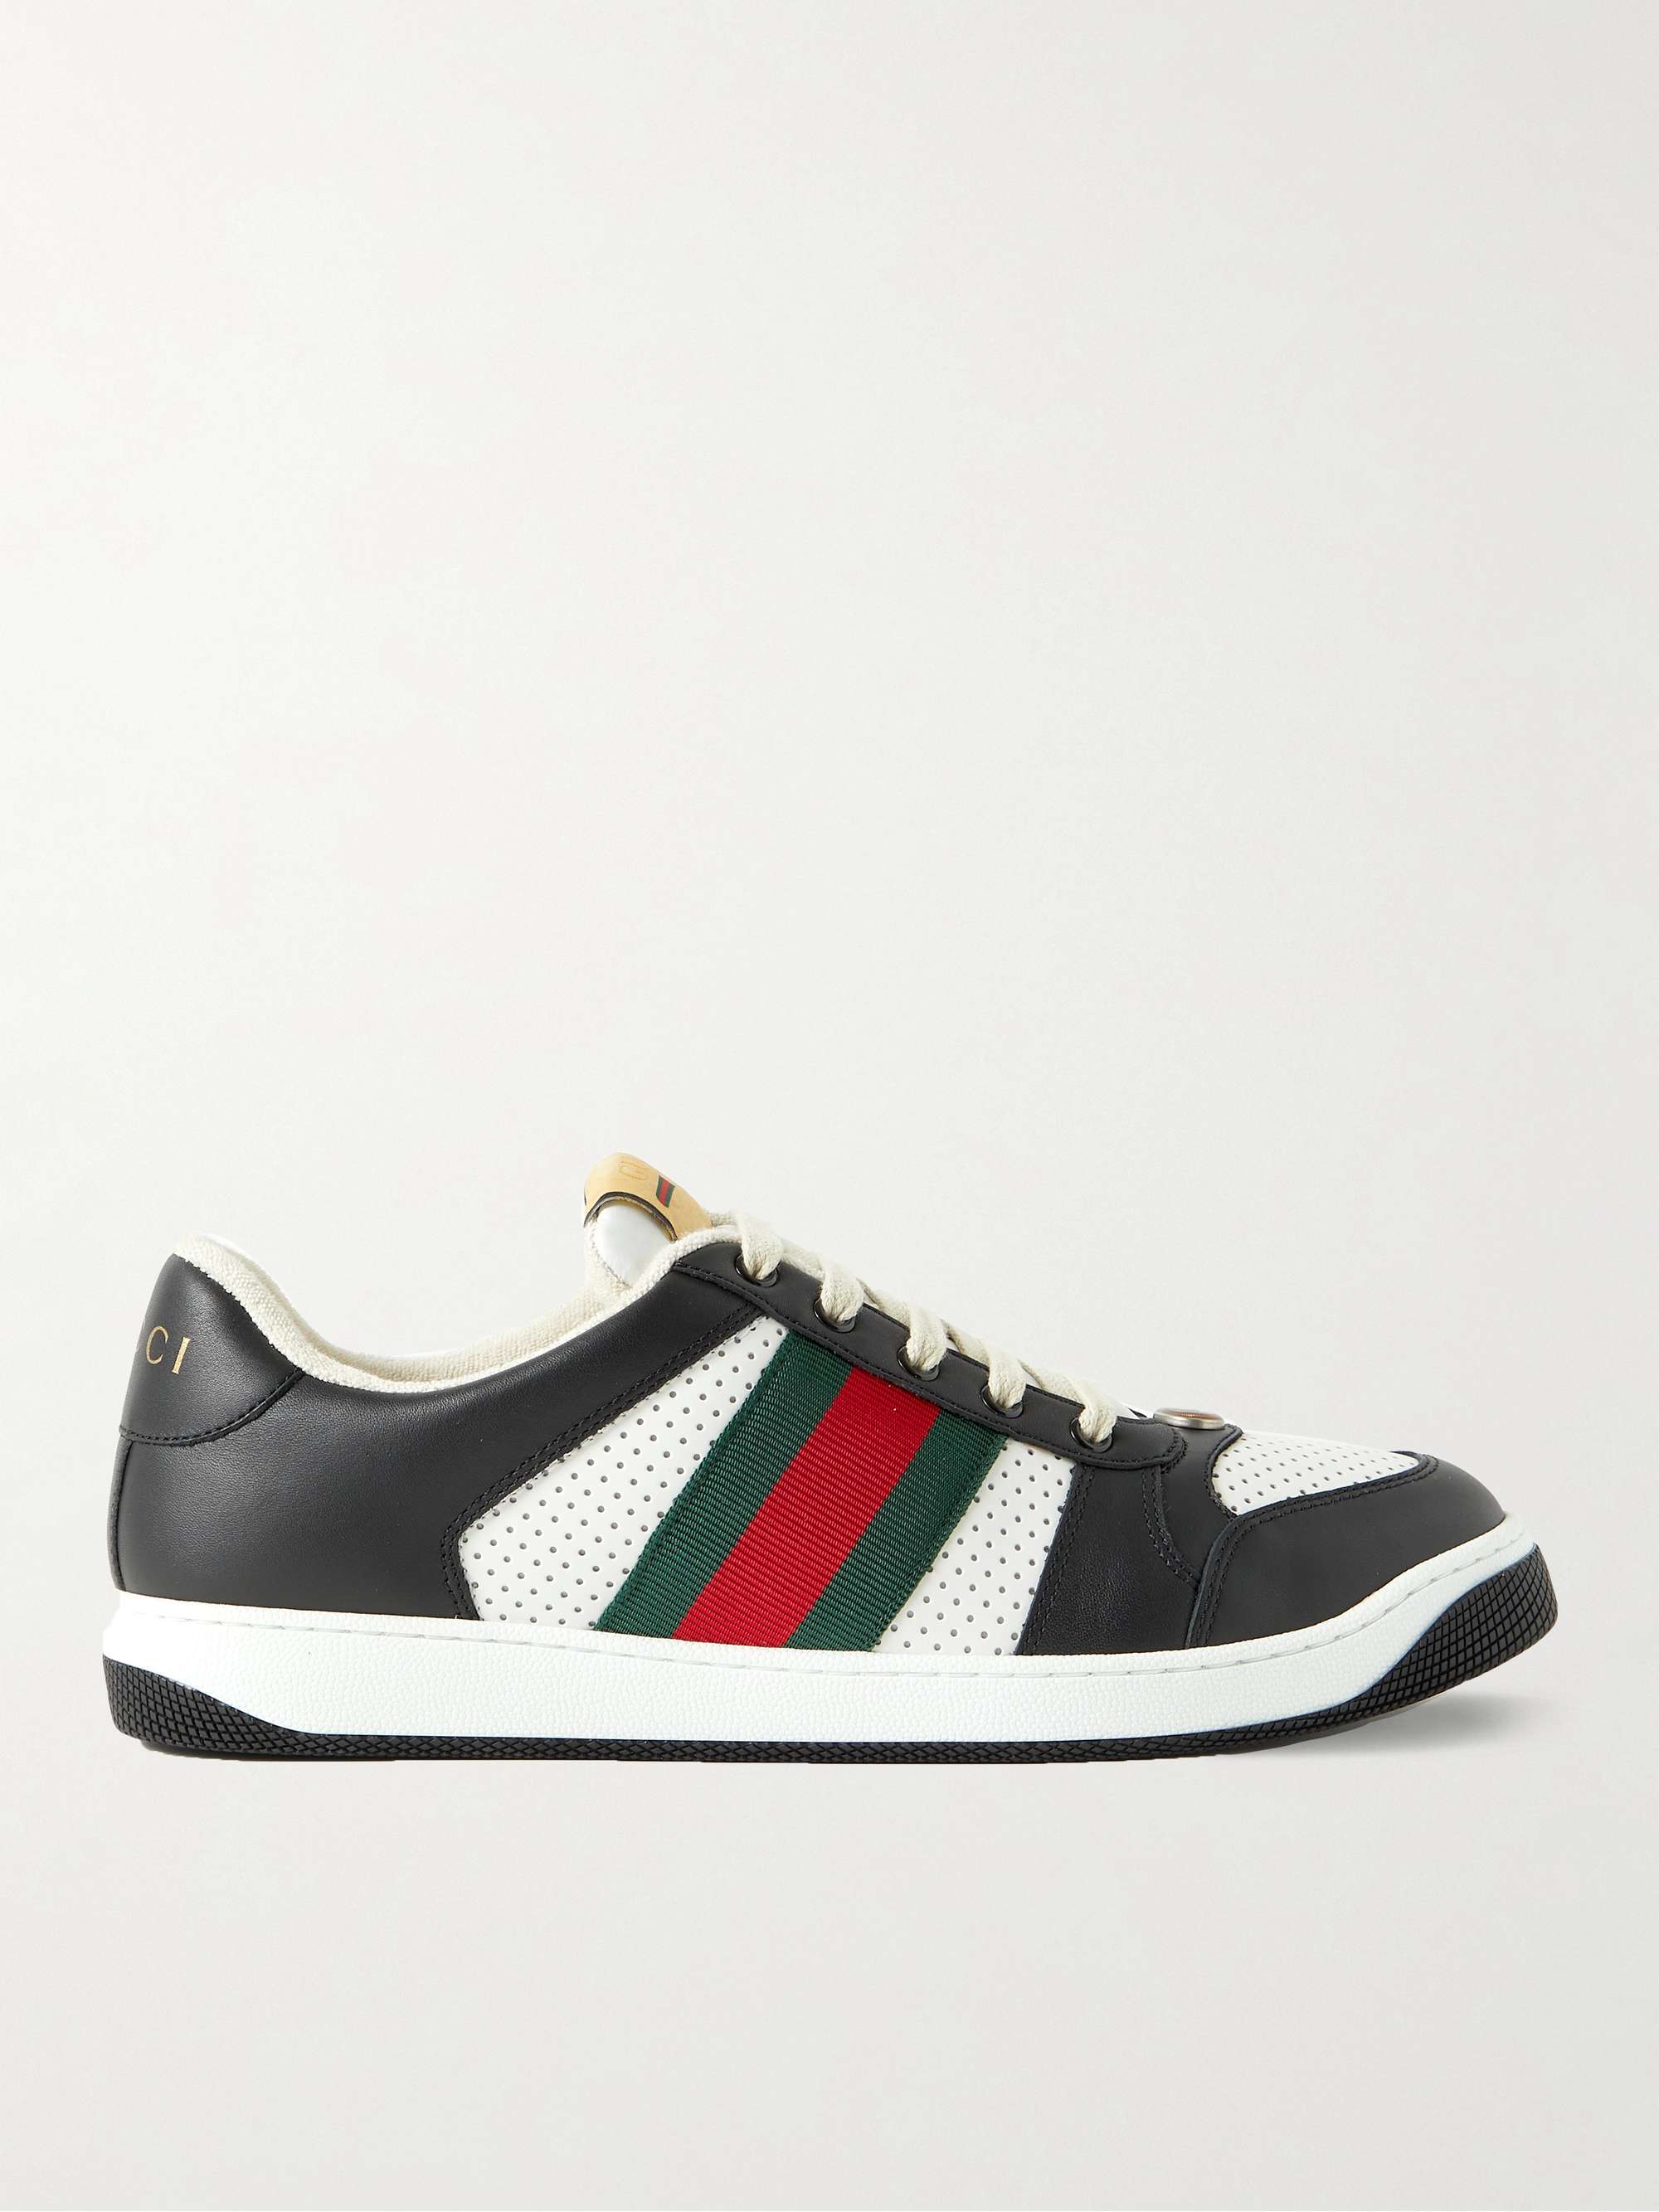 GUCCI Screener Webbing-Trimmed Perforated Leather Sneakers | MR PORTER